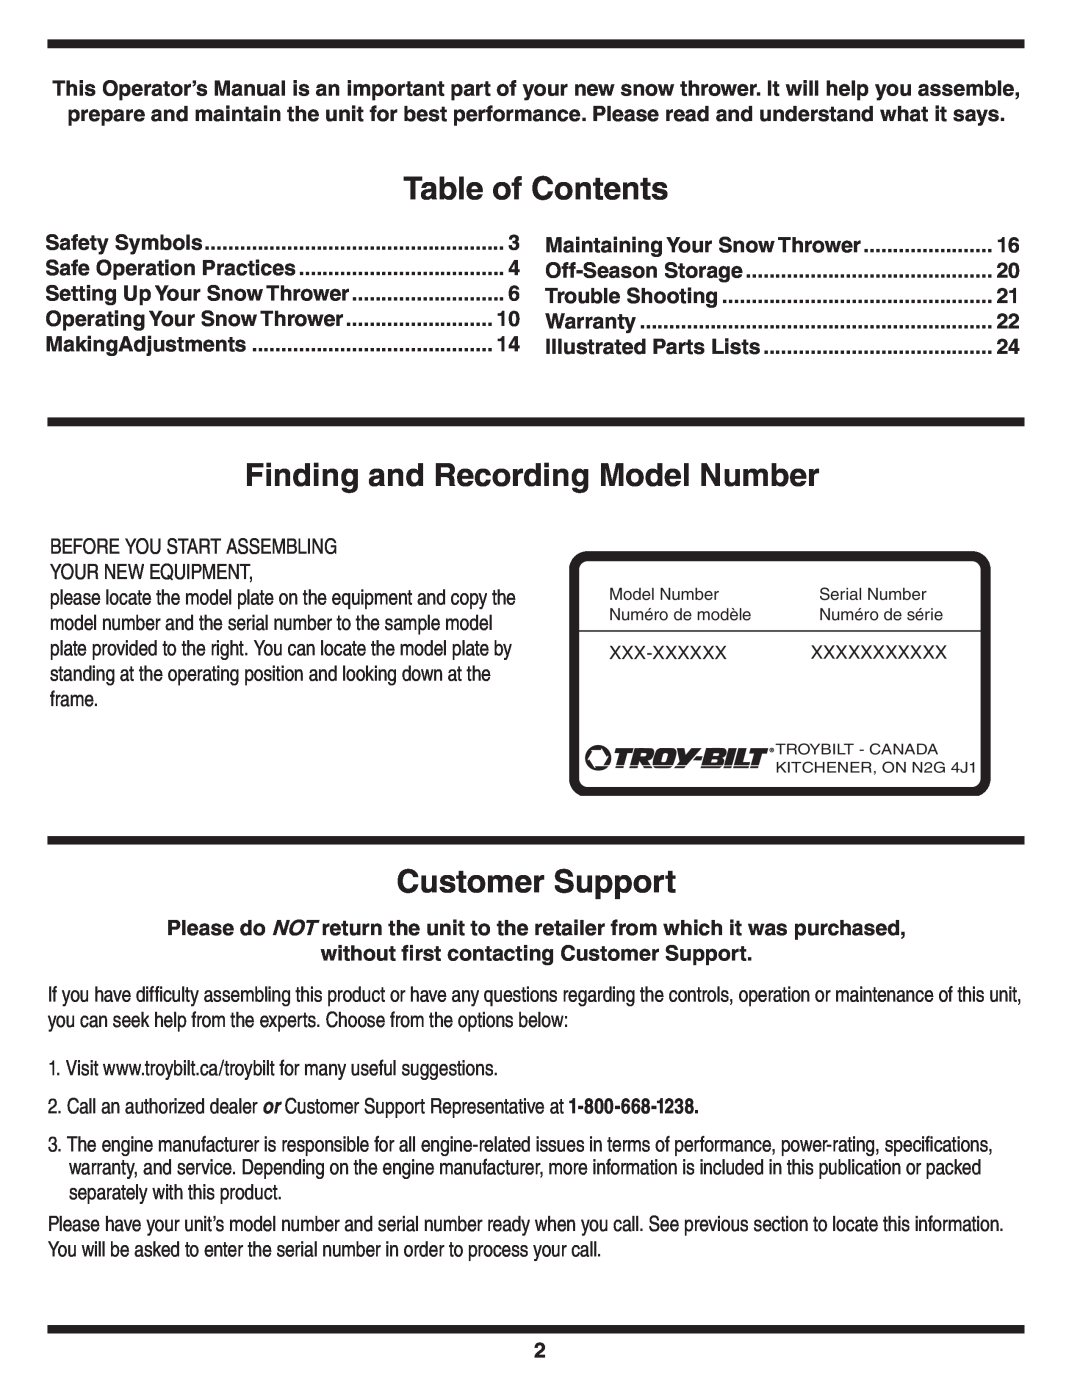 Troy-Bilt 769-04090 warranty Table of Contents, Finding and Recording Model Number, Customer Support 